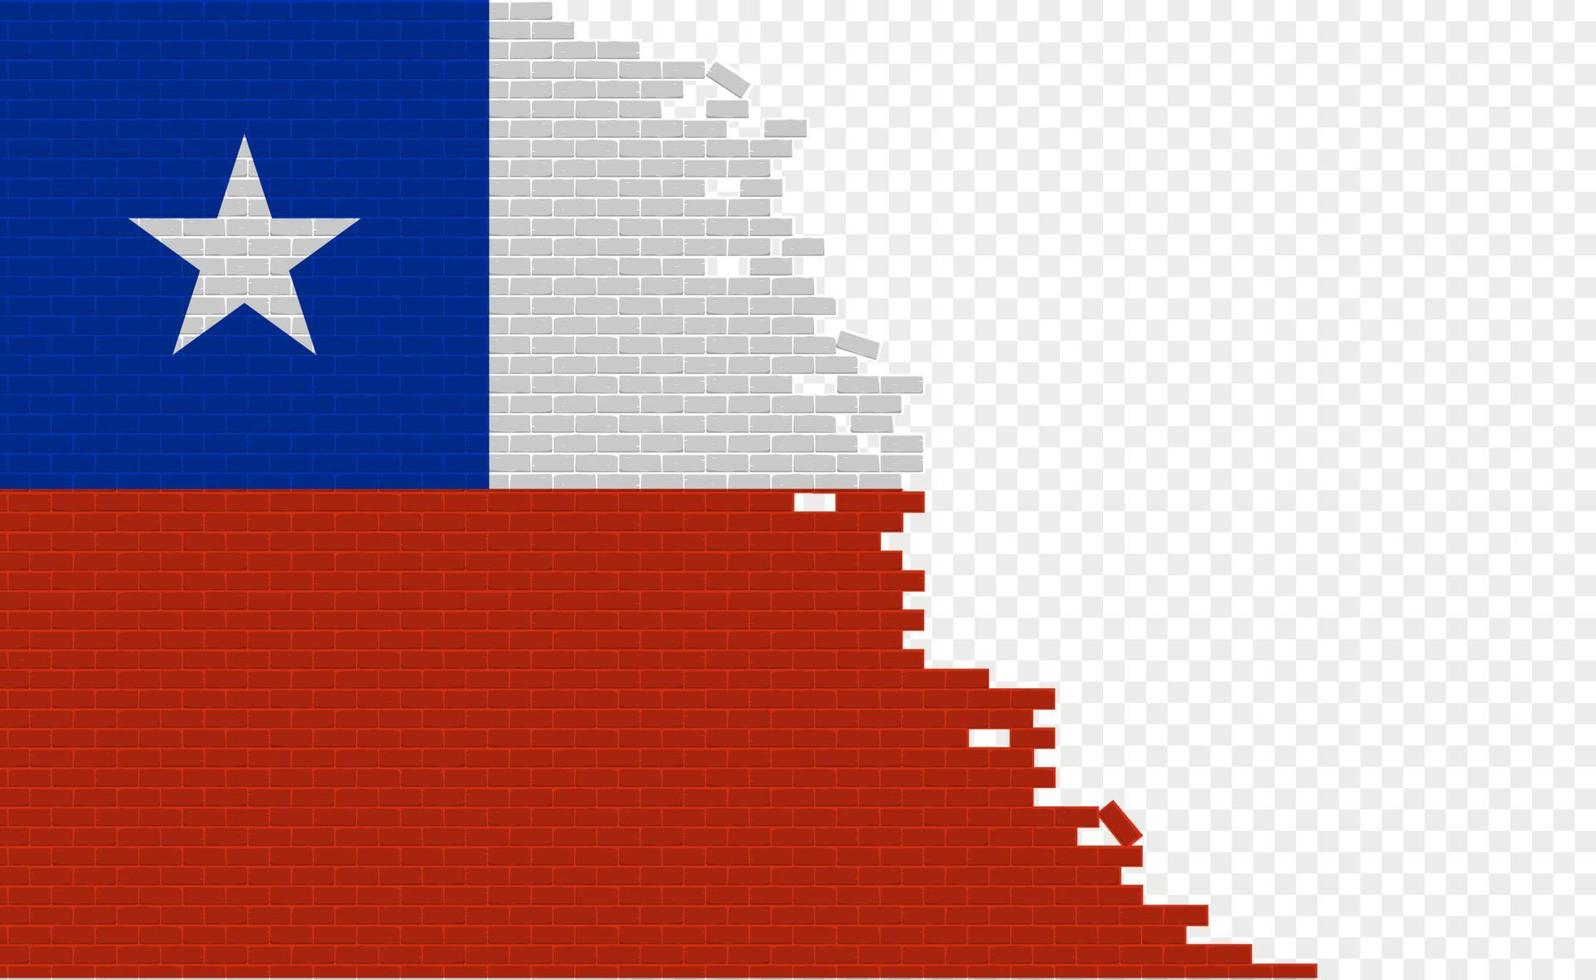 Chile flag on broken brick wall. Empty flag field of another country. Country comparison. Easy editing and vector in groups.